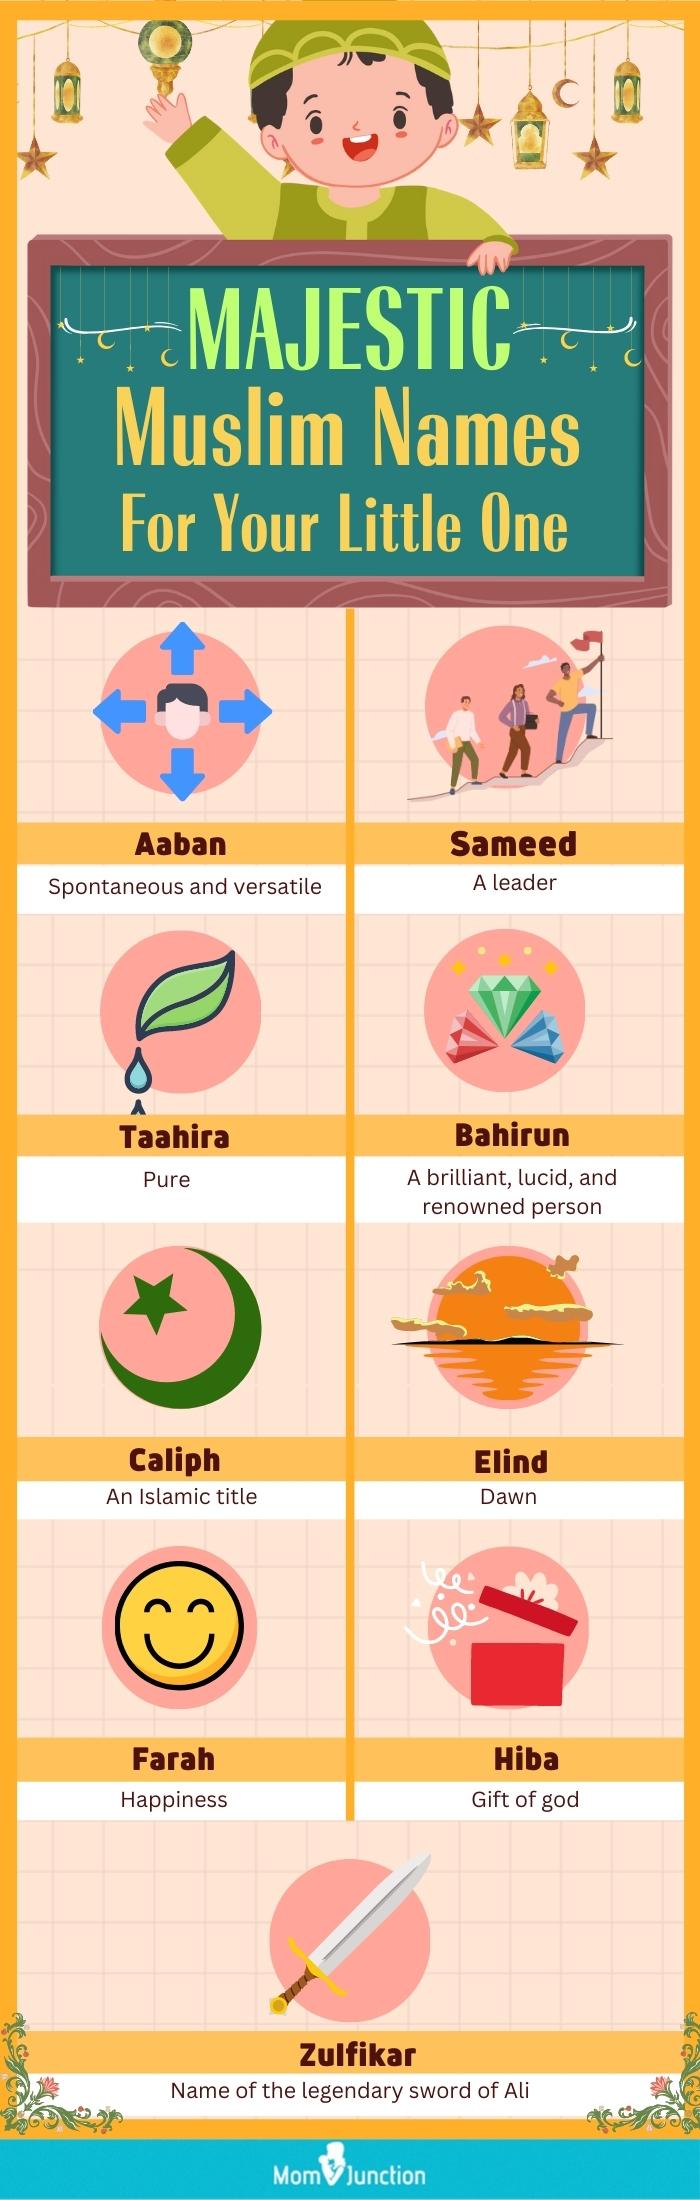 majestic muslim names for your little one (infographic)